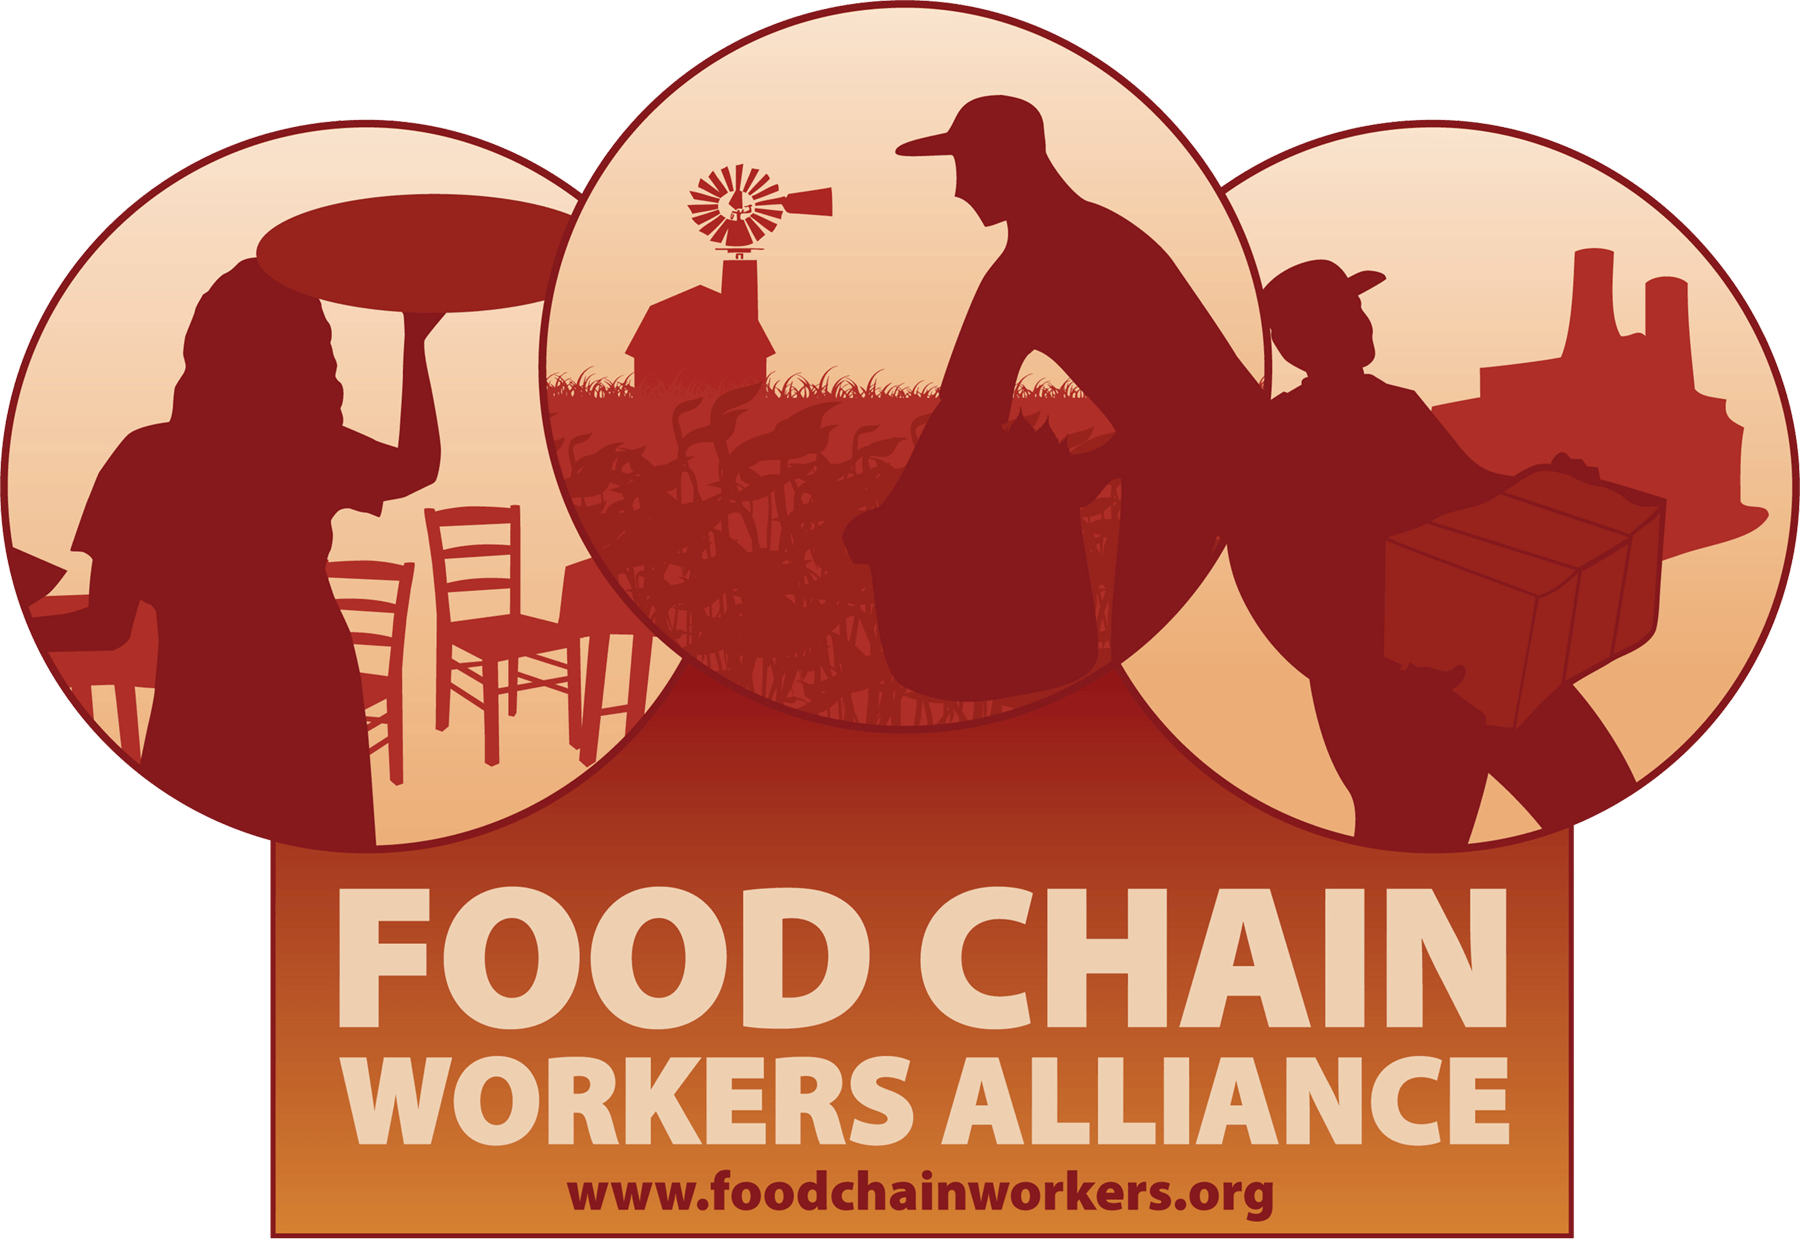 Food Chain Logo - We Are the Food Chain Workers Alliance Chain Workers Alliance